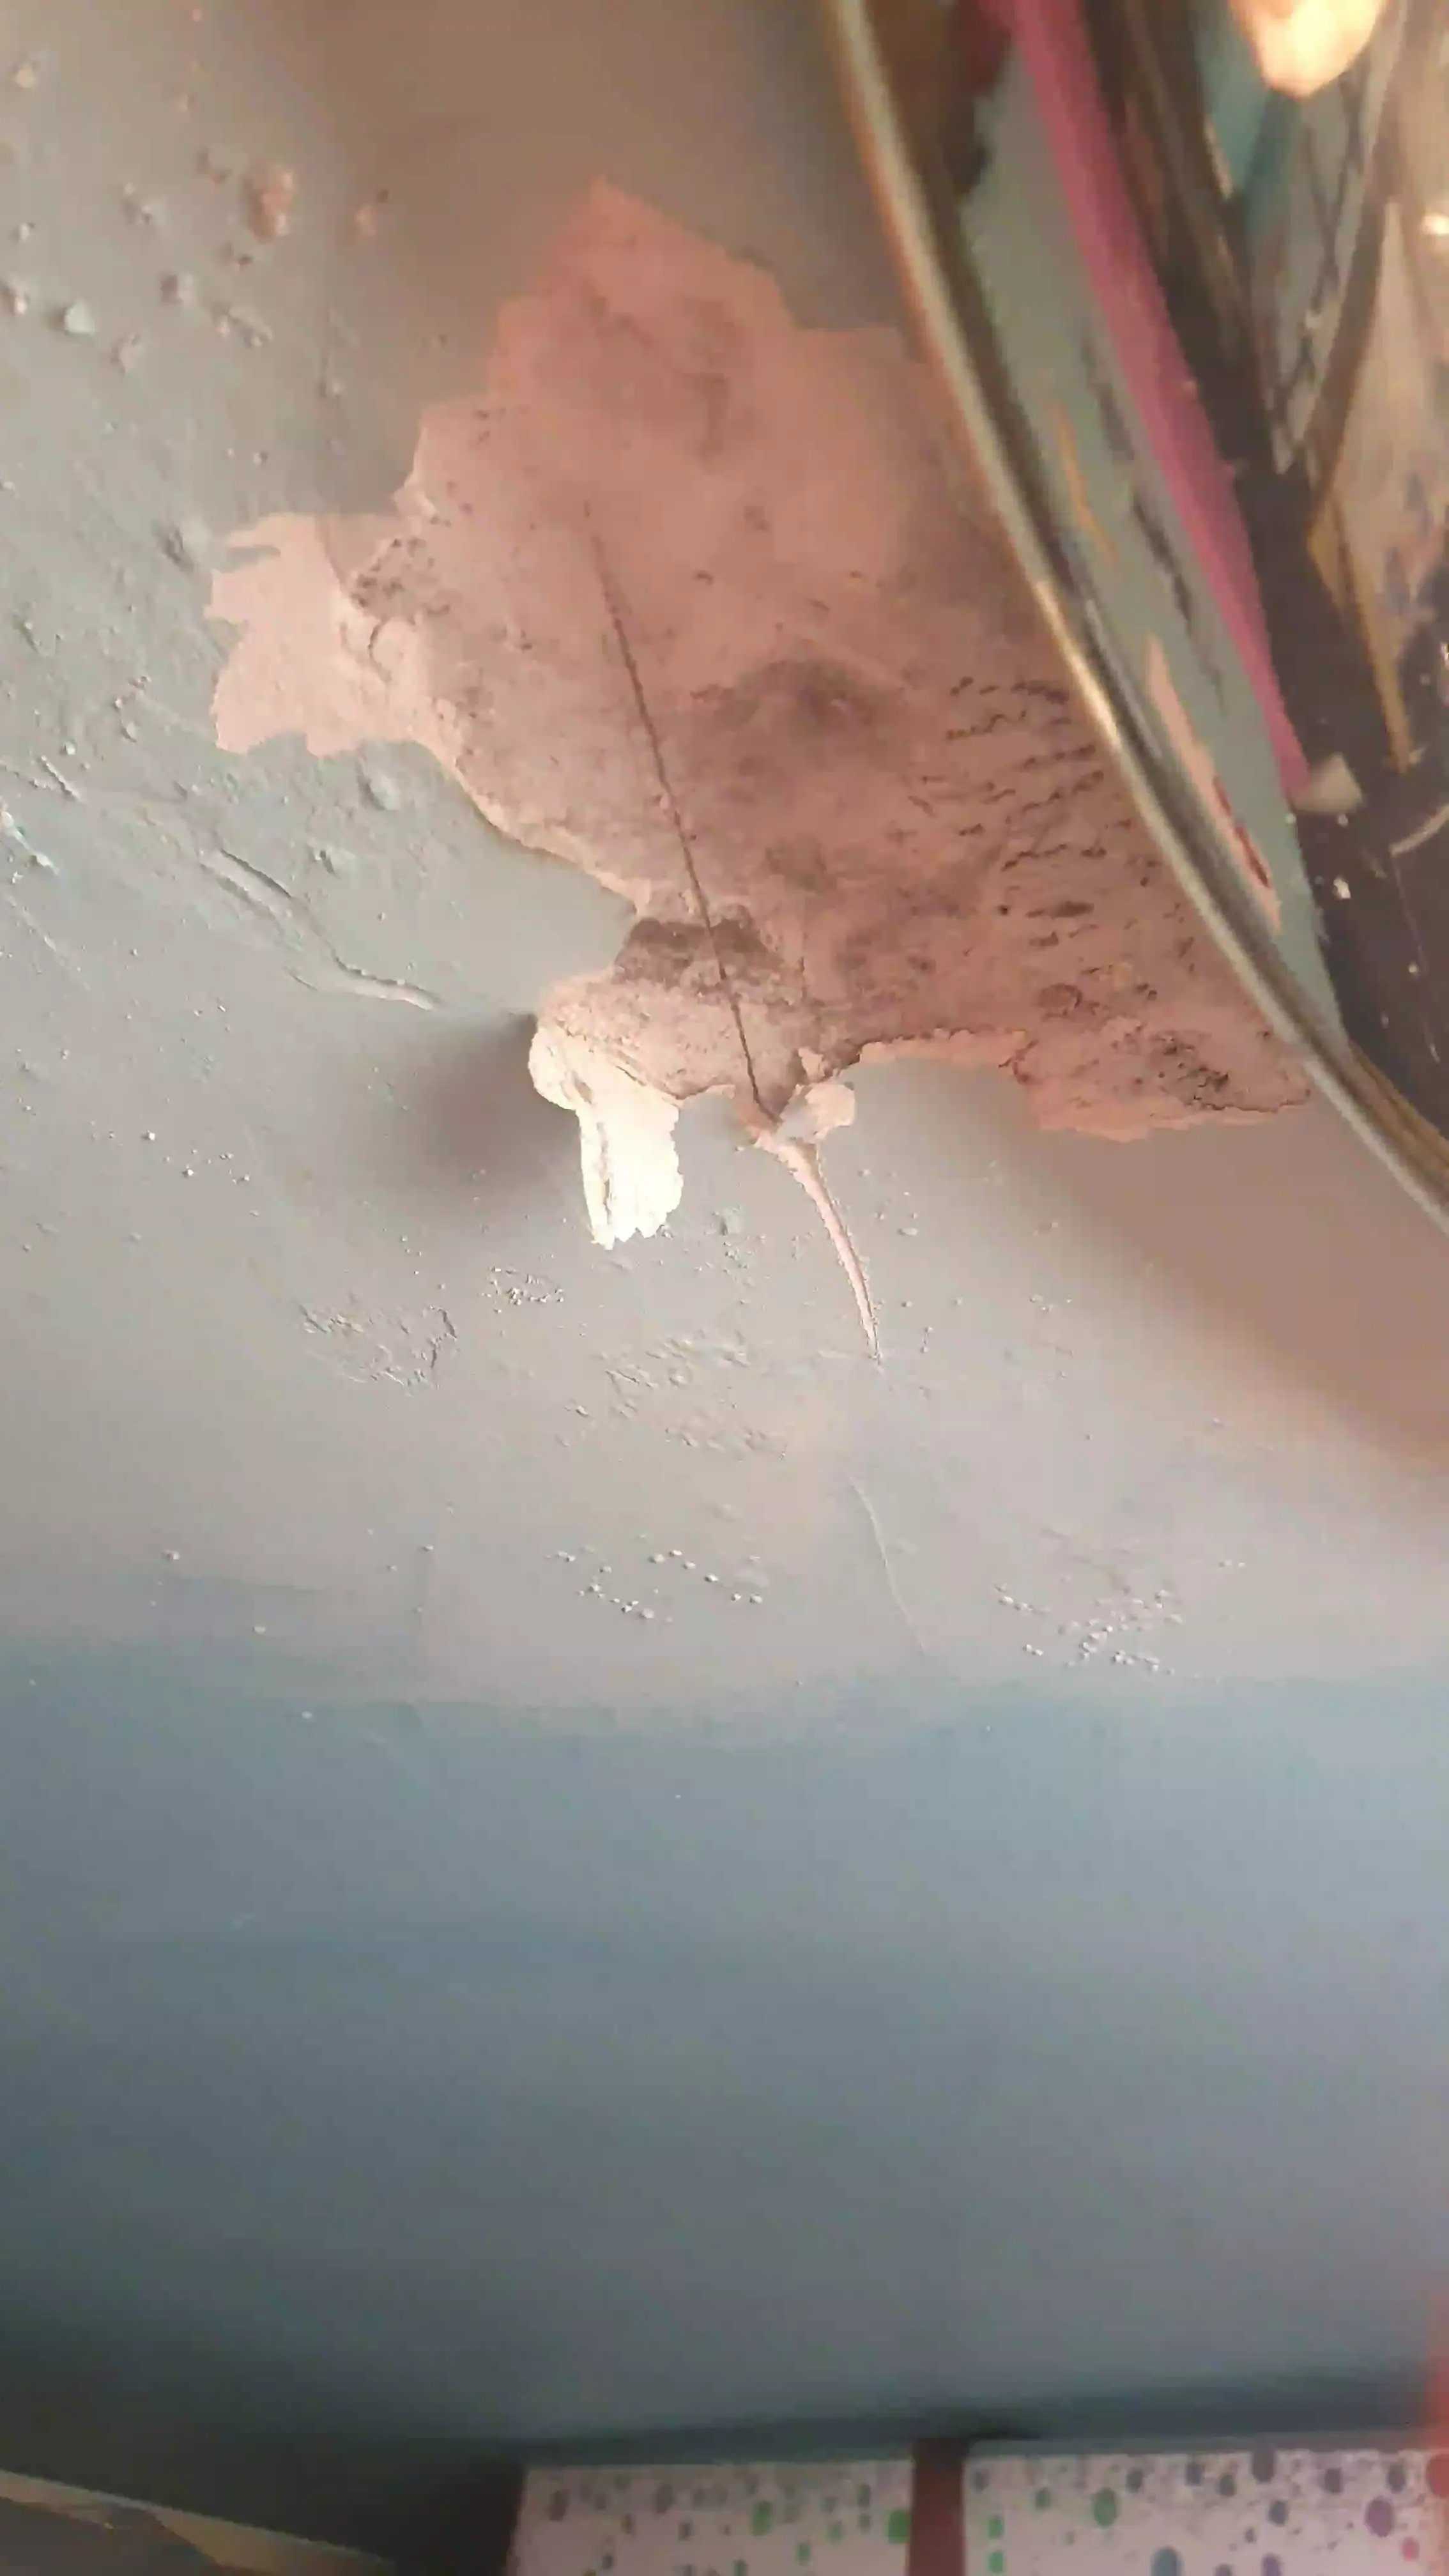 SP52948-Lot-158-damaged-ceiling-near-electrical-lighting-due-to-water-leaks-unrepaired-since-Sep2020-photo-4-taken-3Feb2022.webp